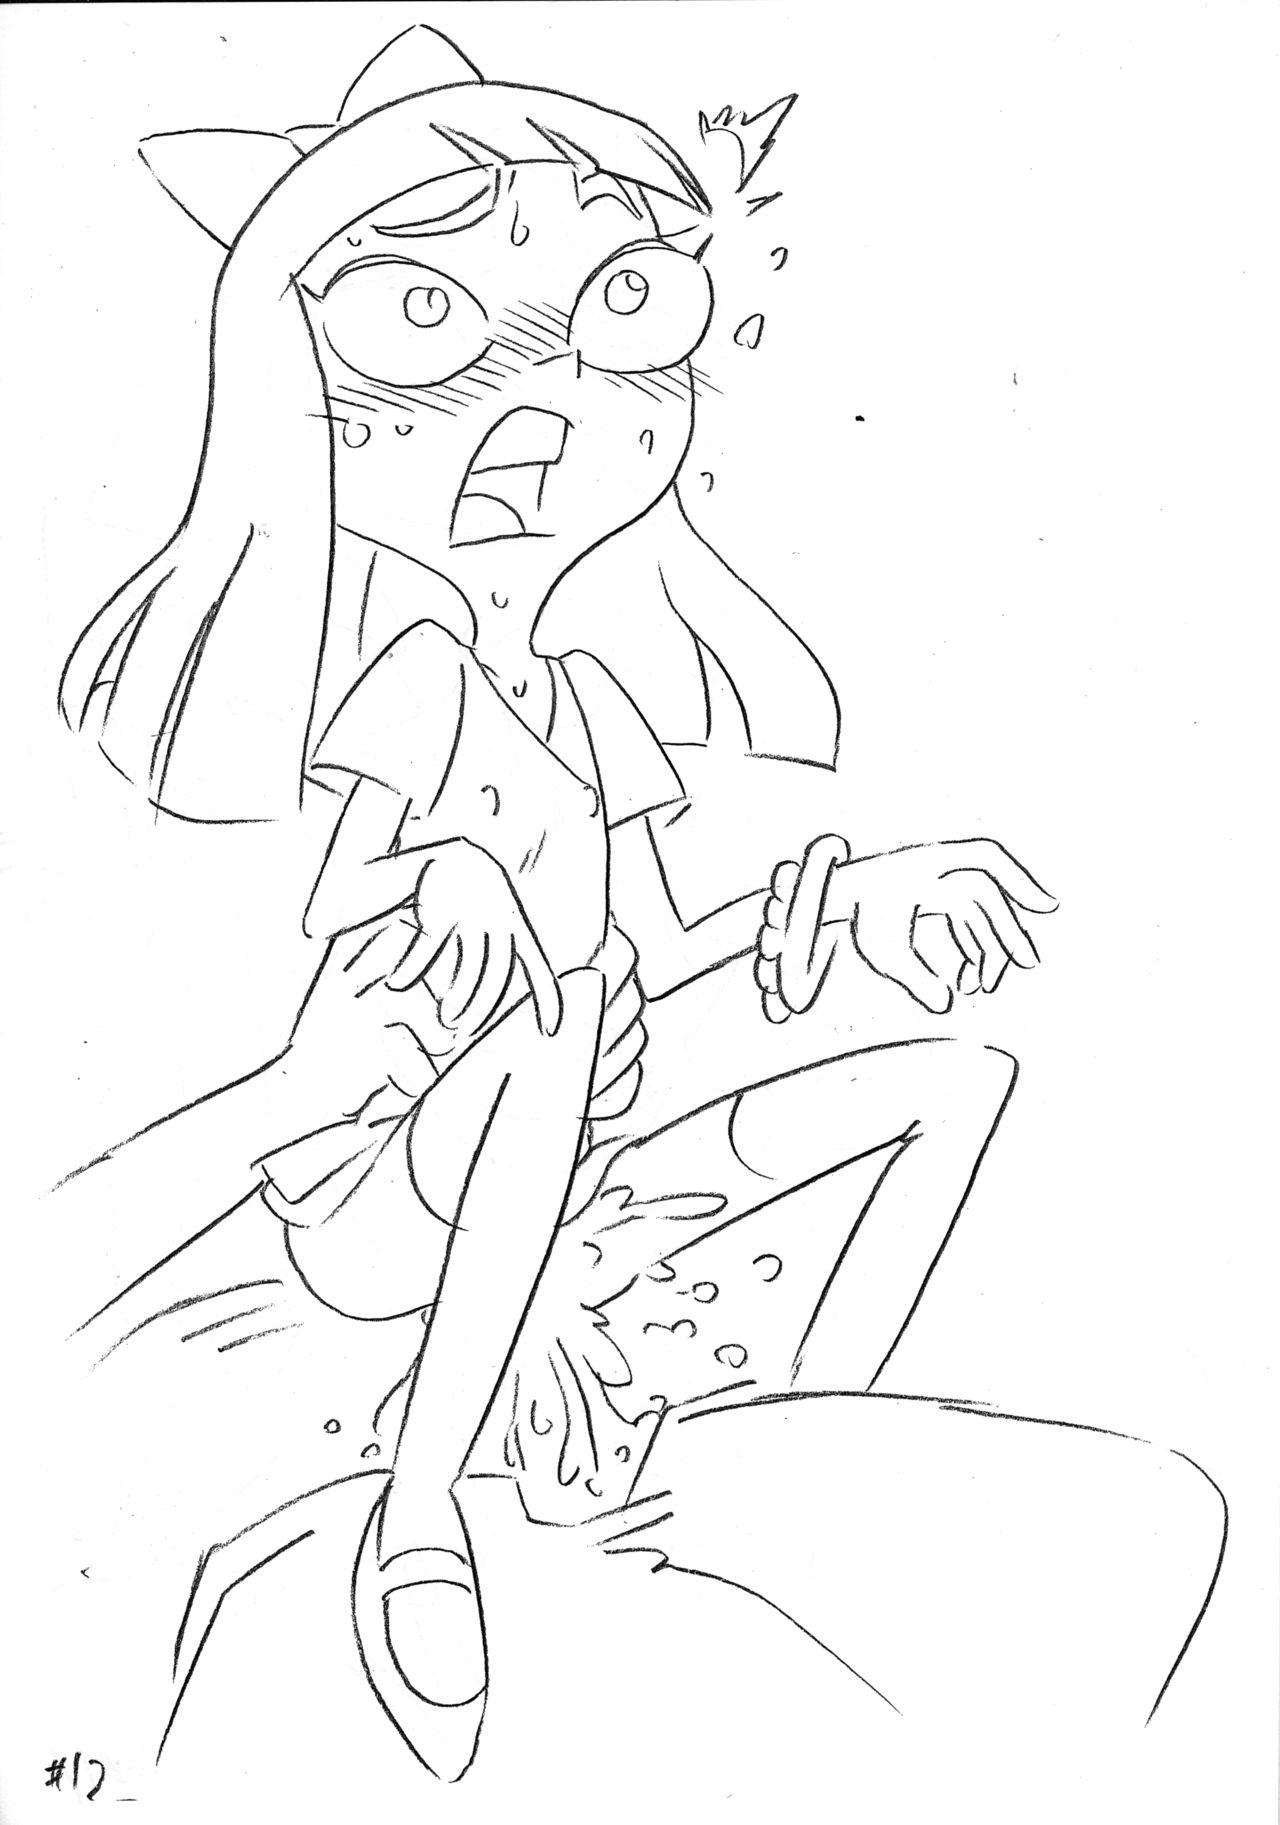 Teen Fuck Psychosomatic Counterfeit Ex: Stacy in Early Age - Phineas and ferb From - Page 11